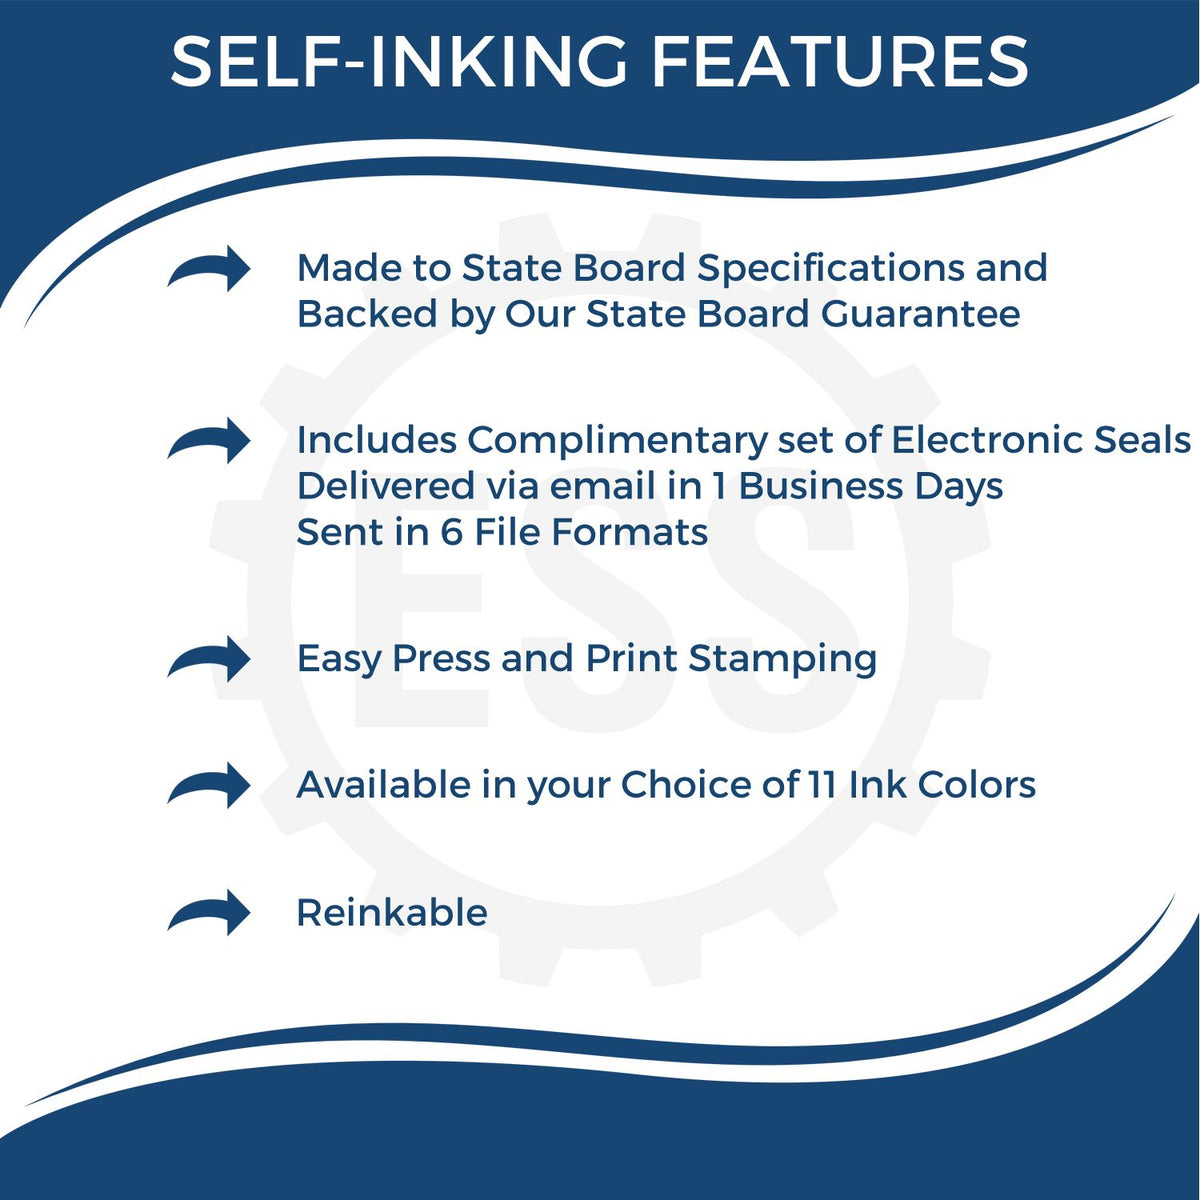 A picture of an infographic highlighting the selling points for the Self-Inking Rectangular Washington Notary Stamp